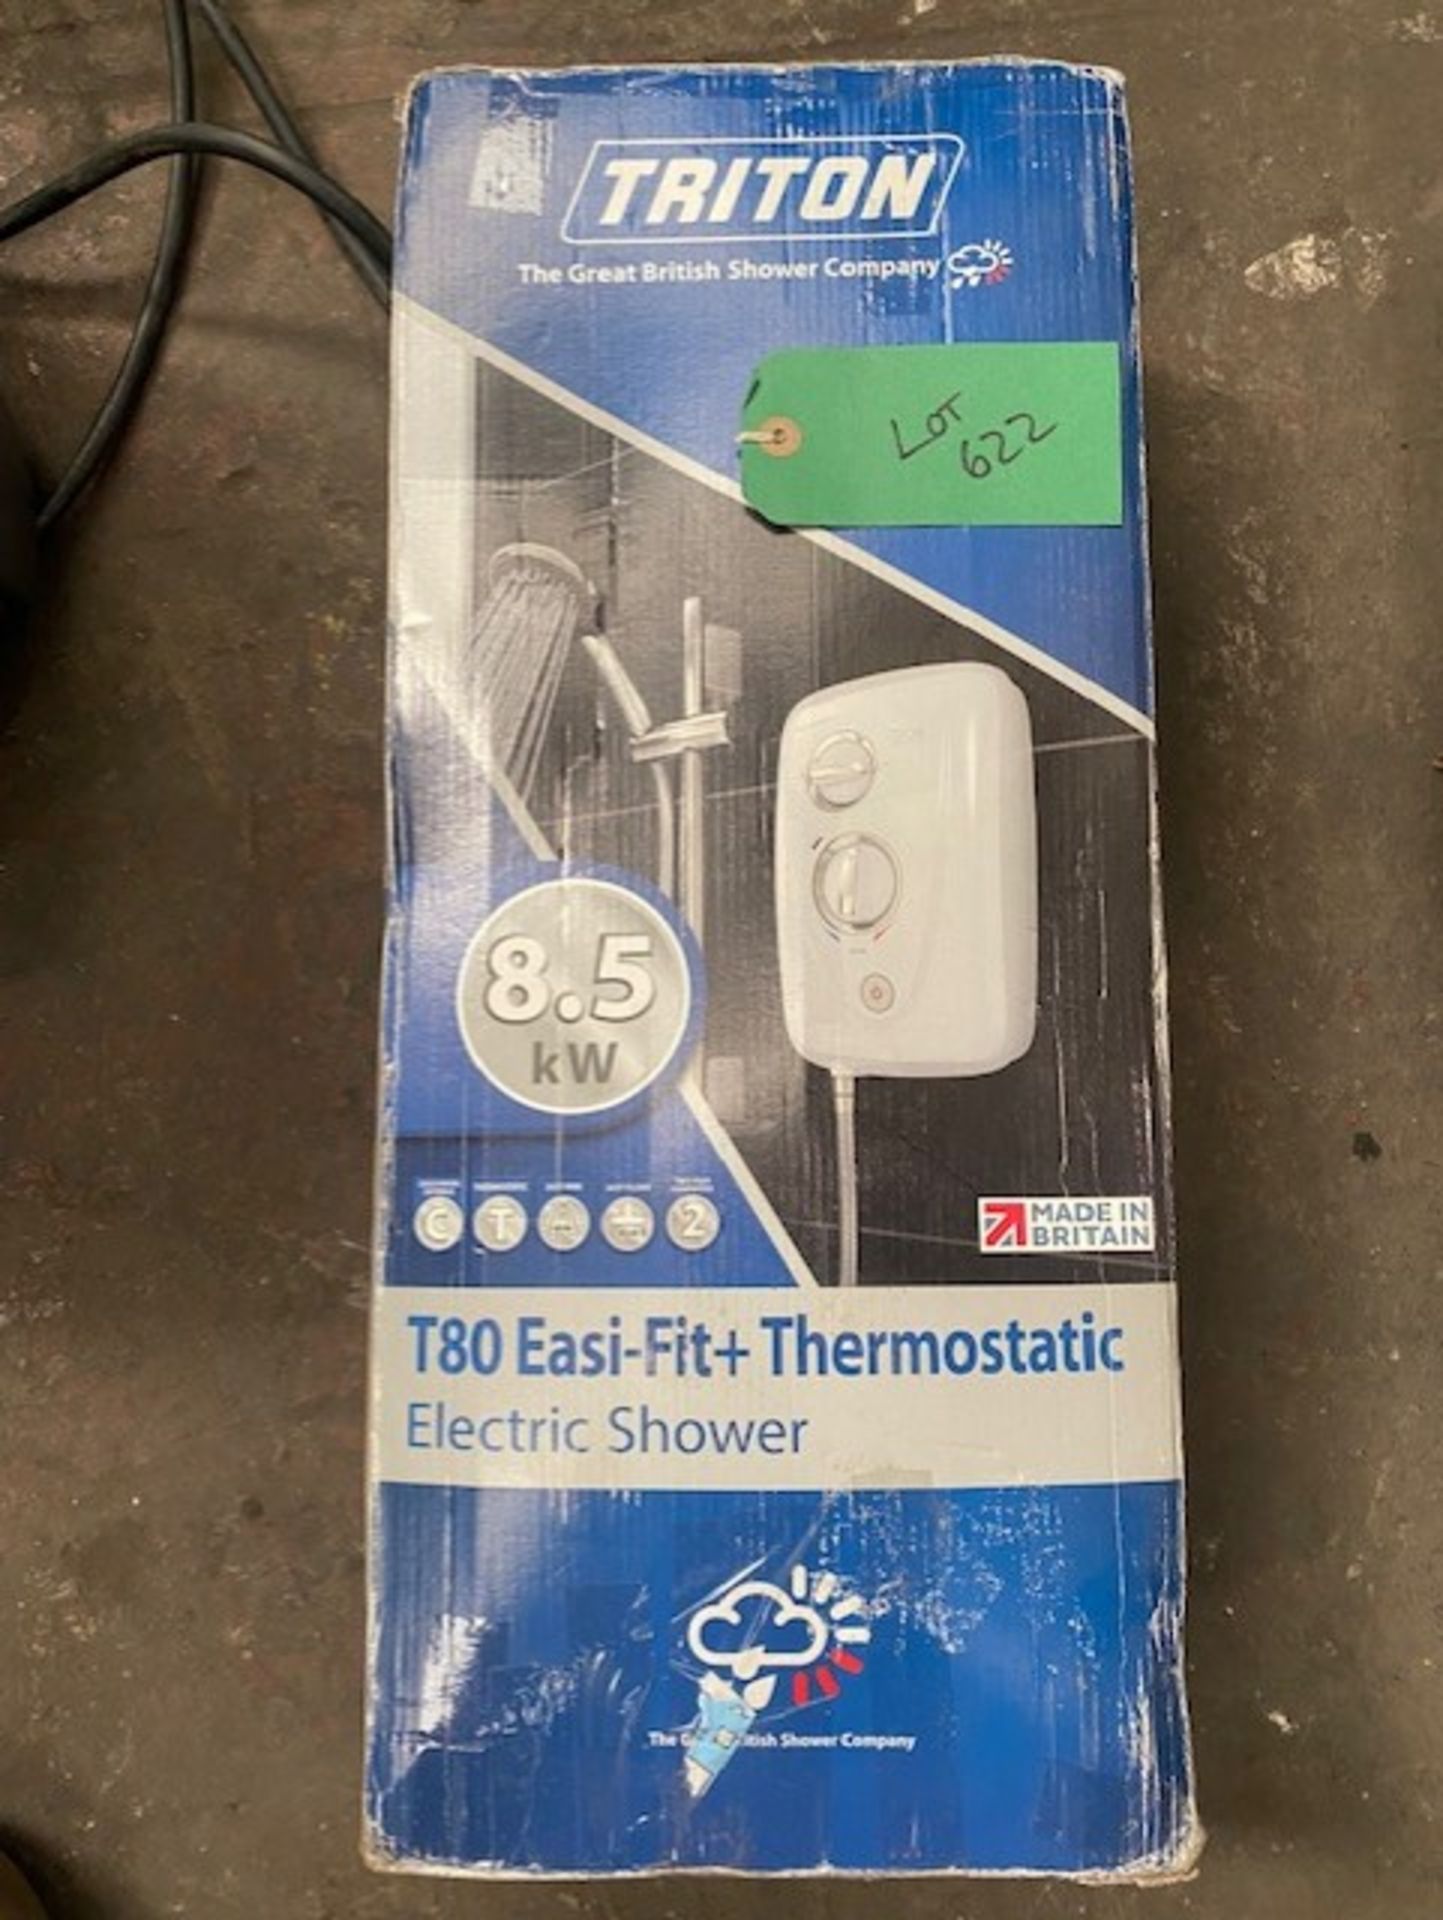 T80 easy fit 8.5kw electric shower. Unit is new, box is damaged. Working order unknown